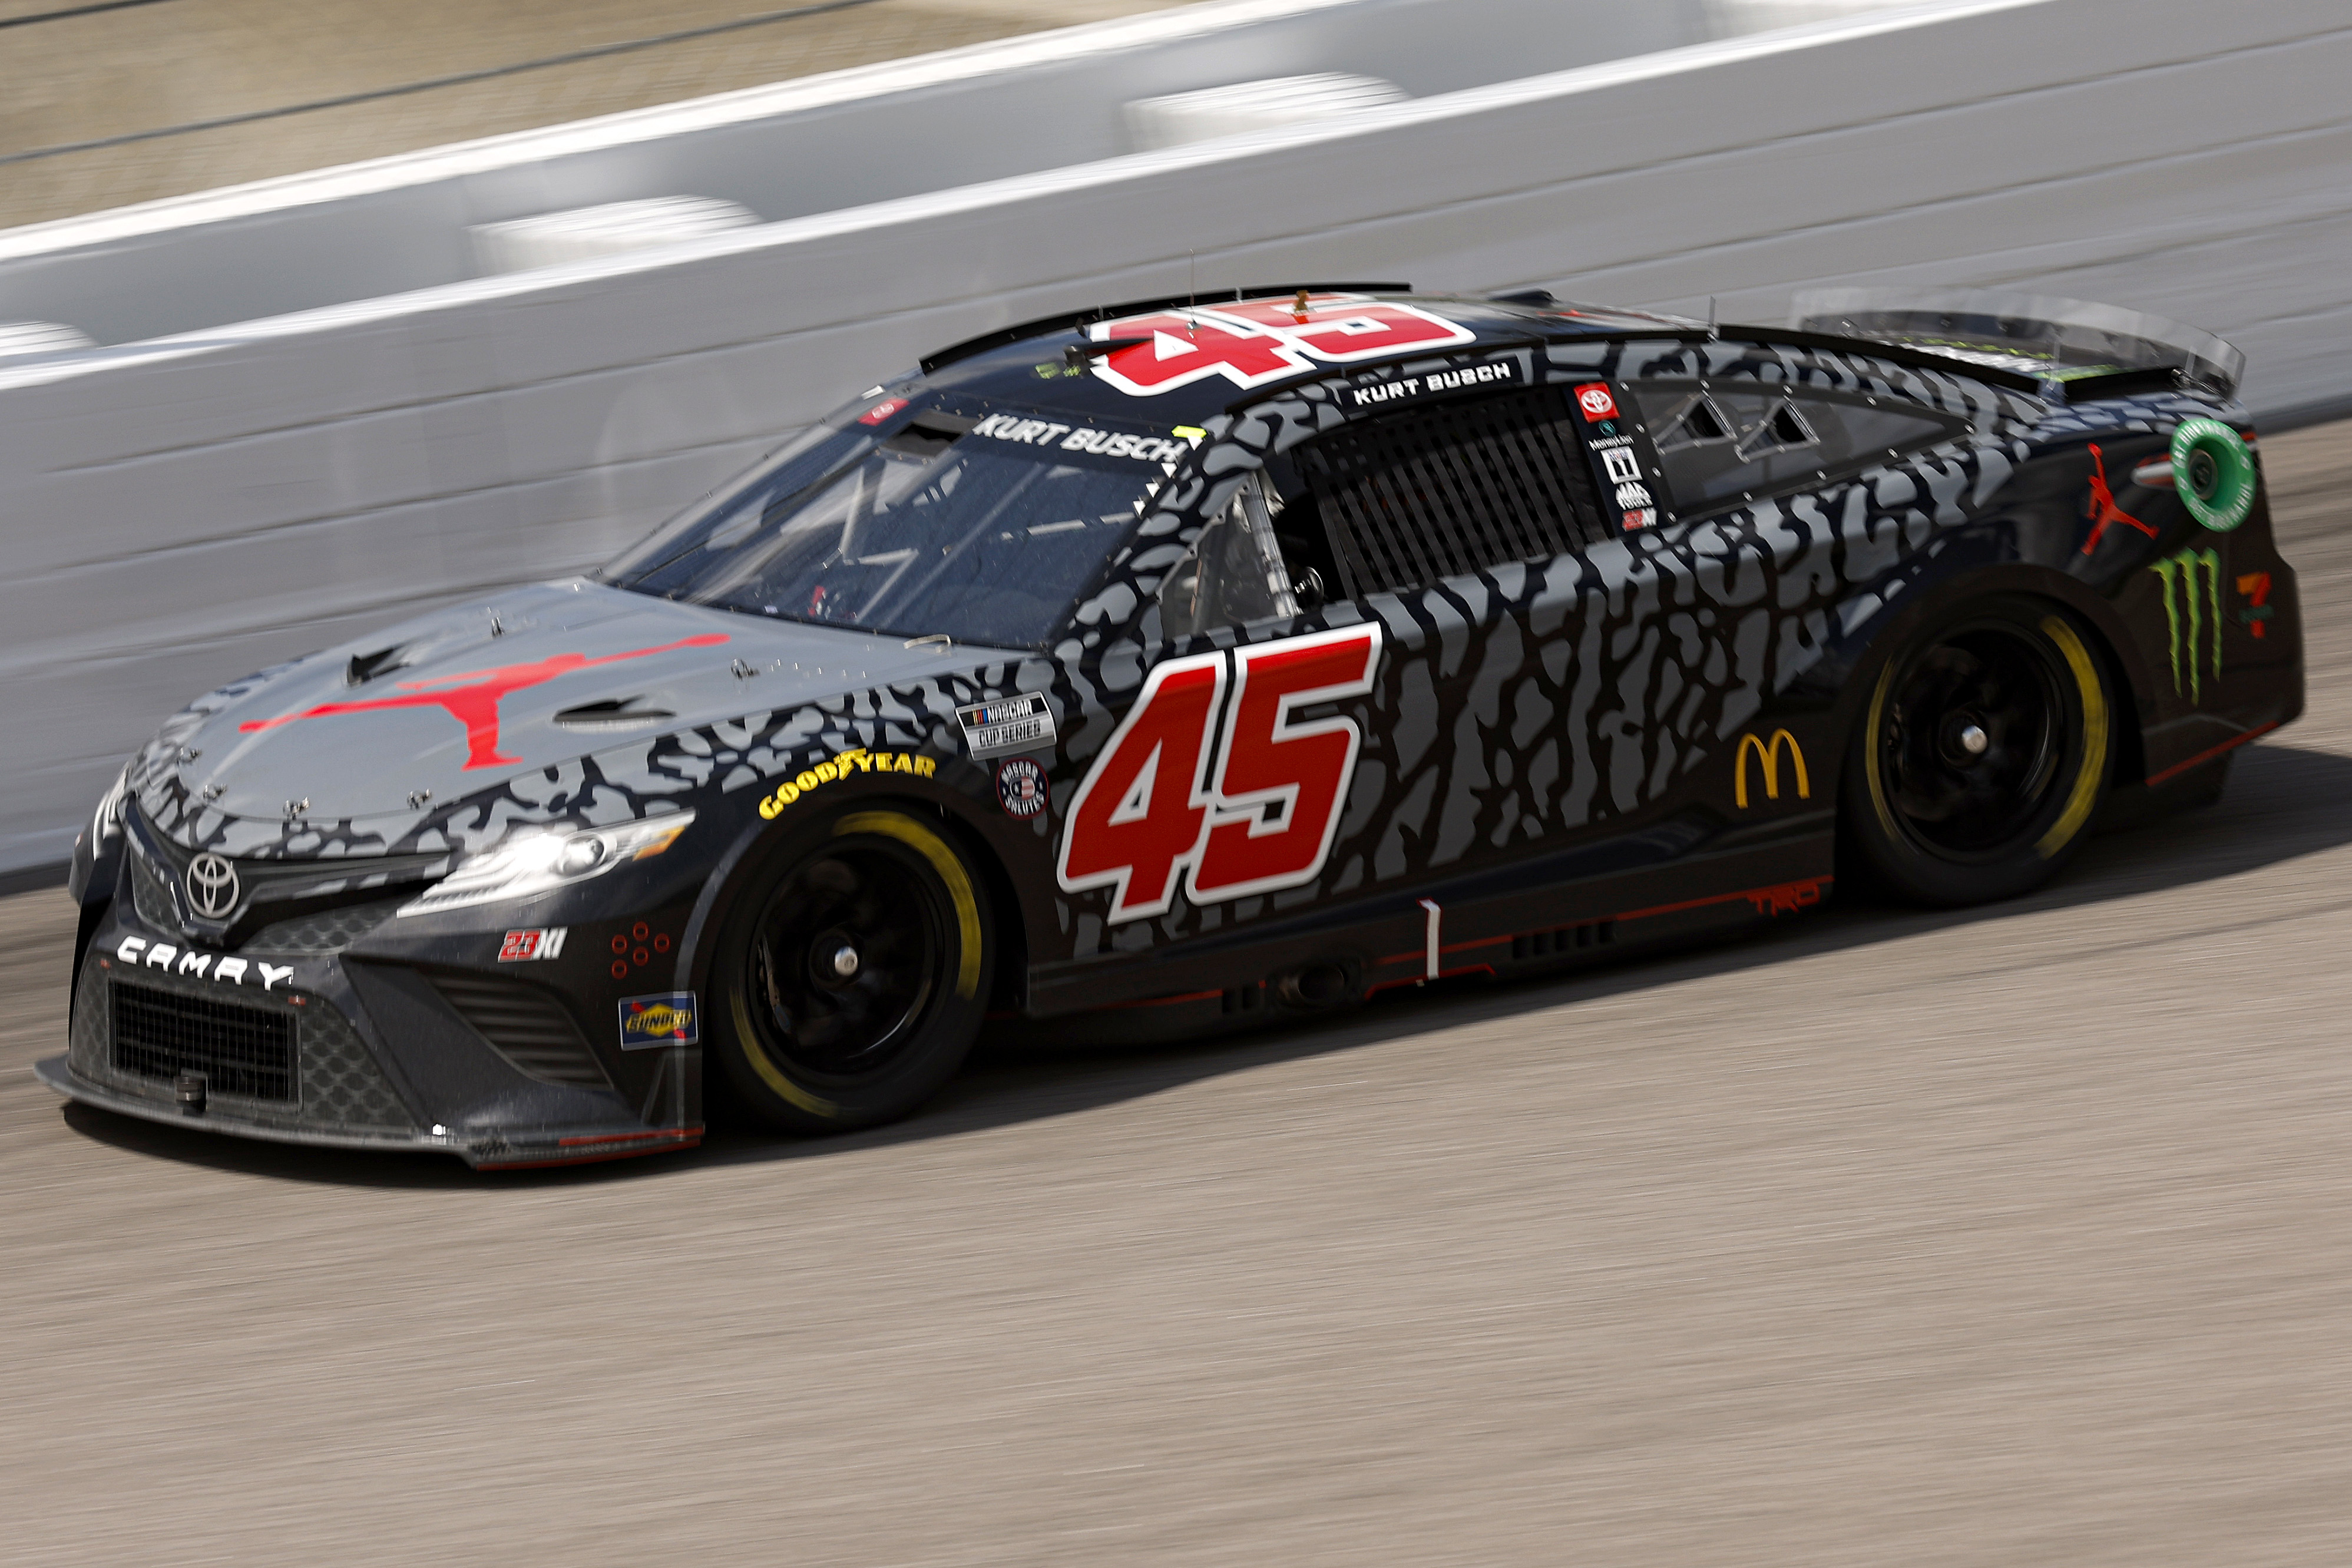 A NASCAR vehicle with the number 45 and sponsor logos races on a track